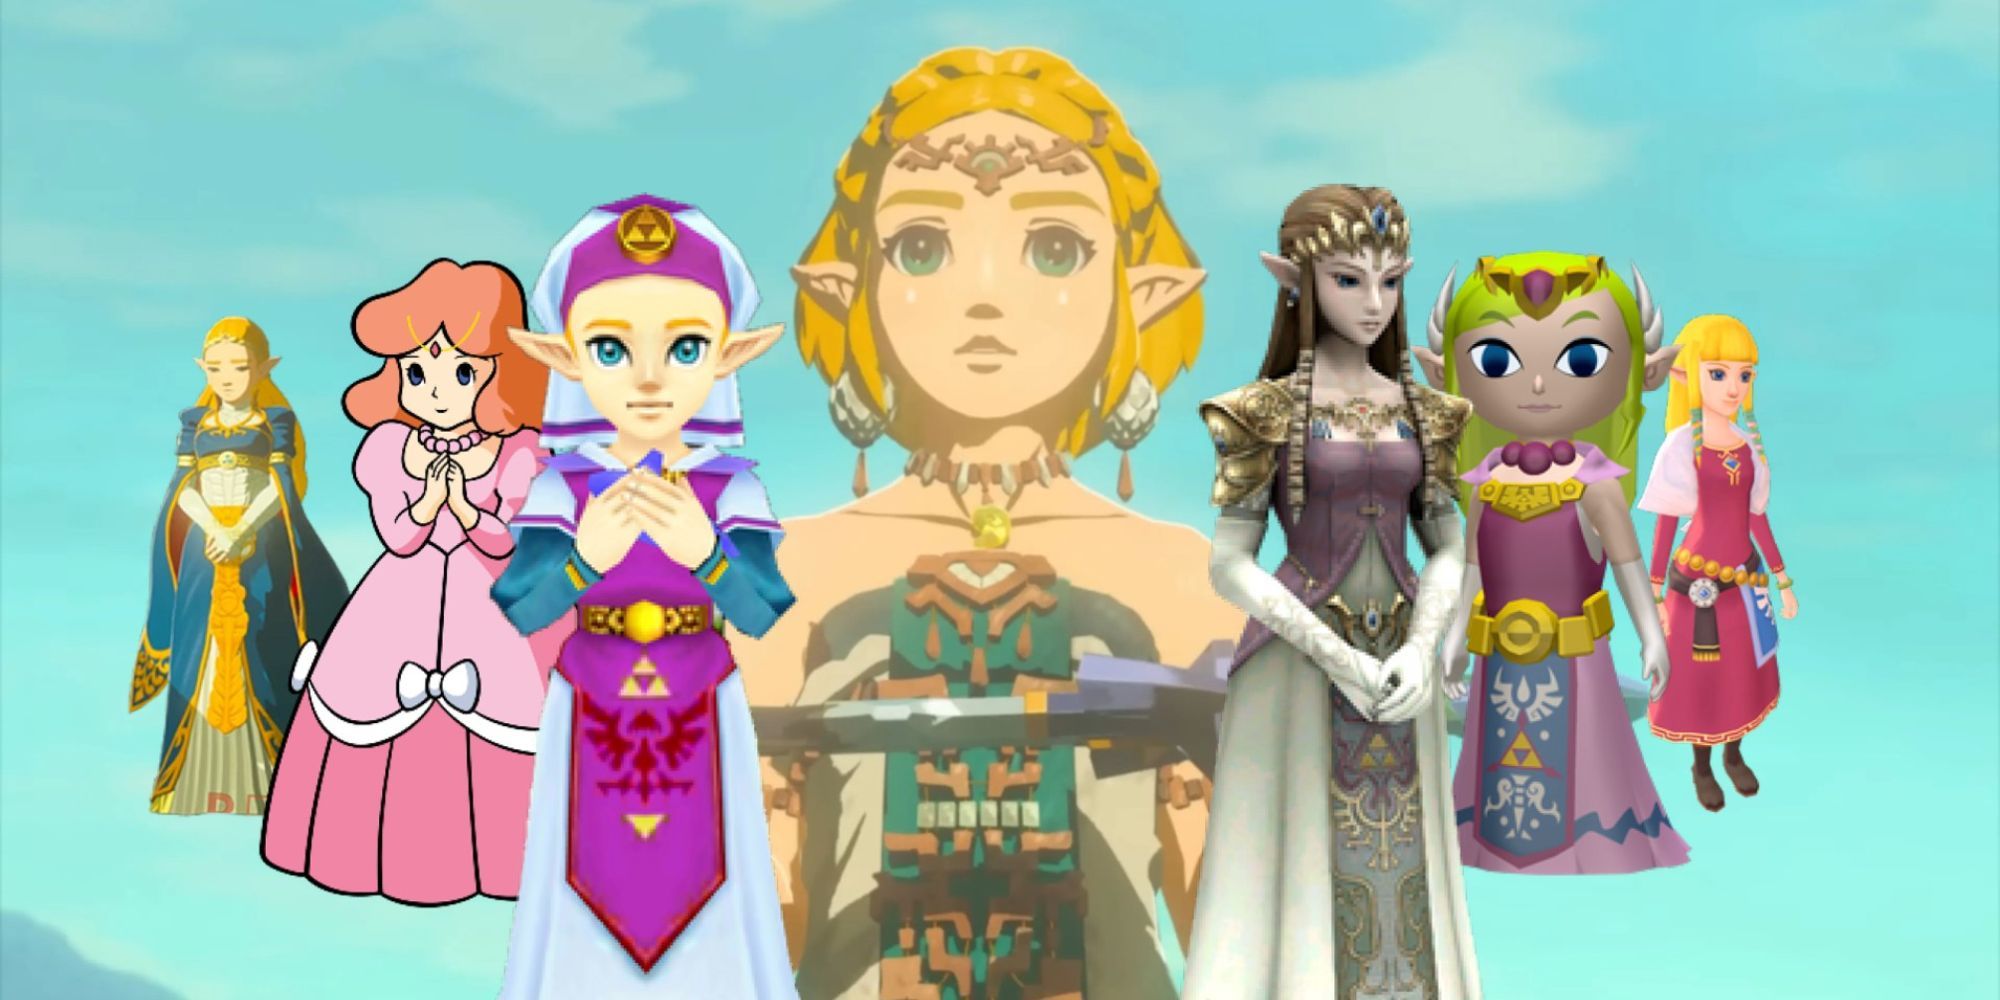 Seven iterations of Zelda, all of them standing around TotK Zelda as she holds the master sword